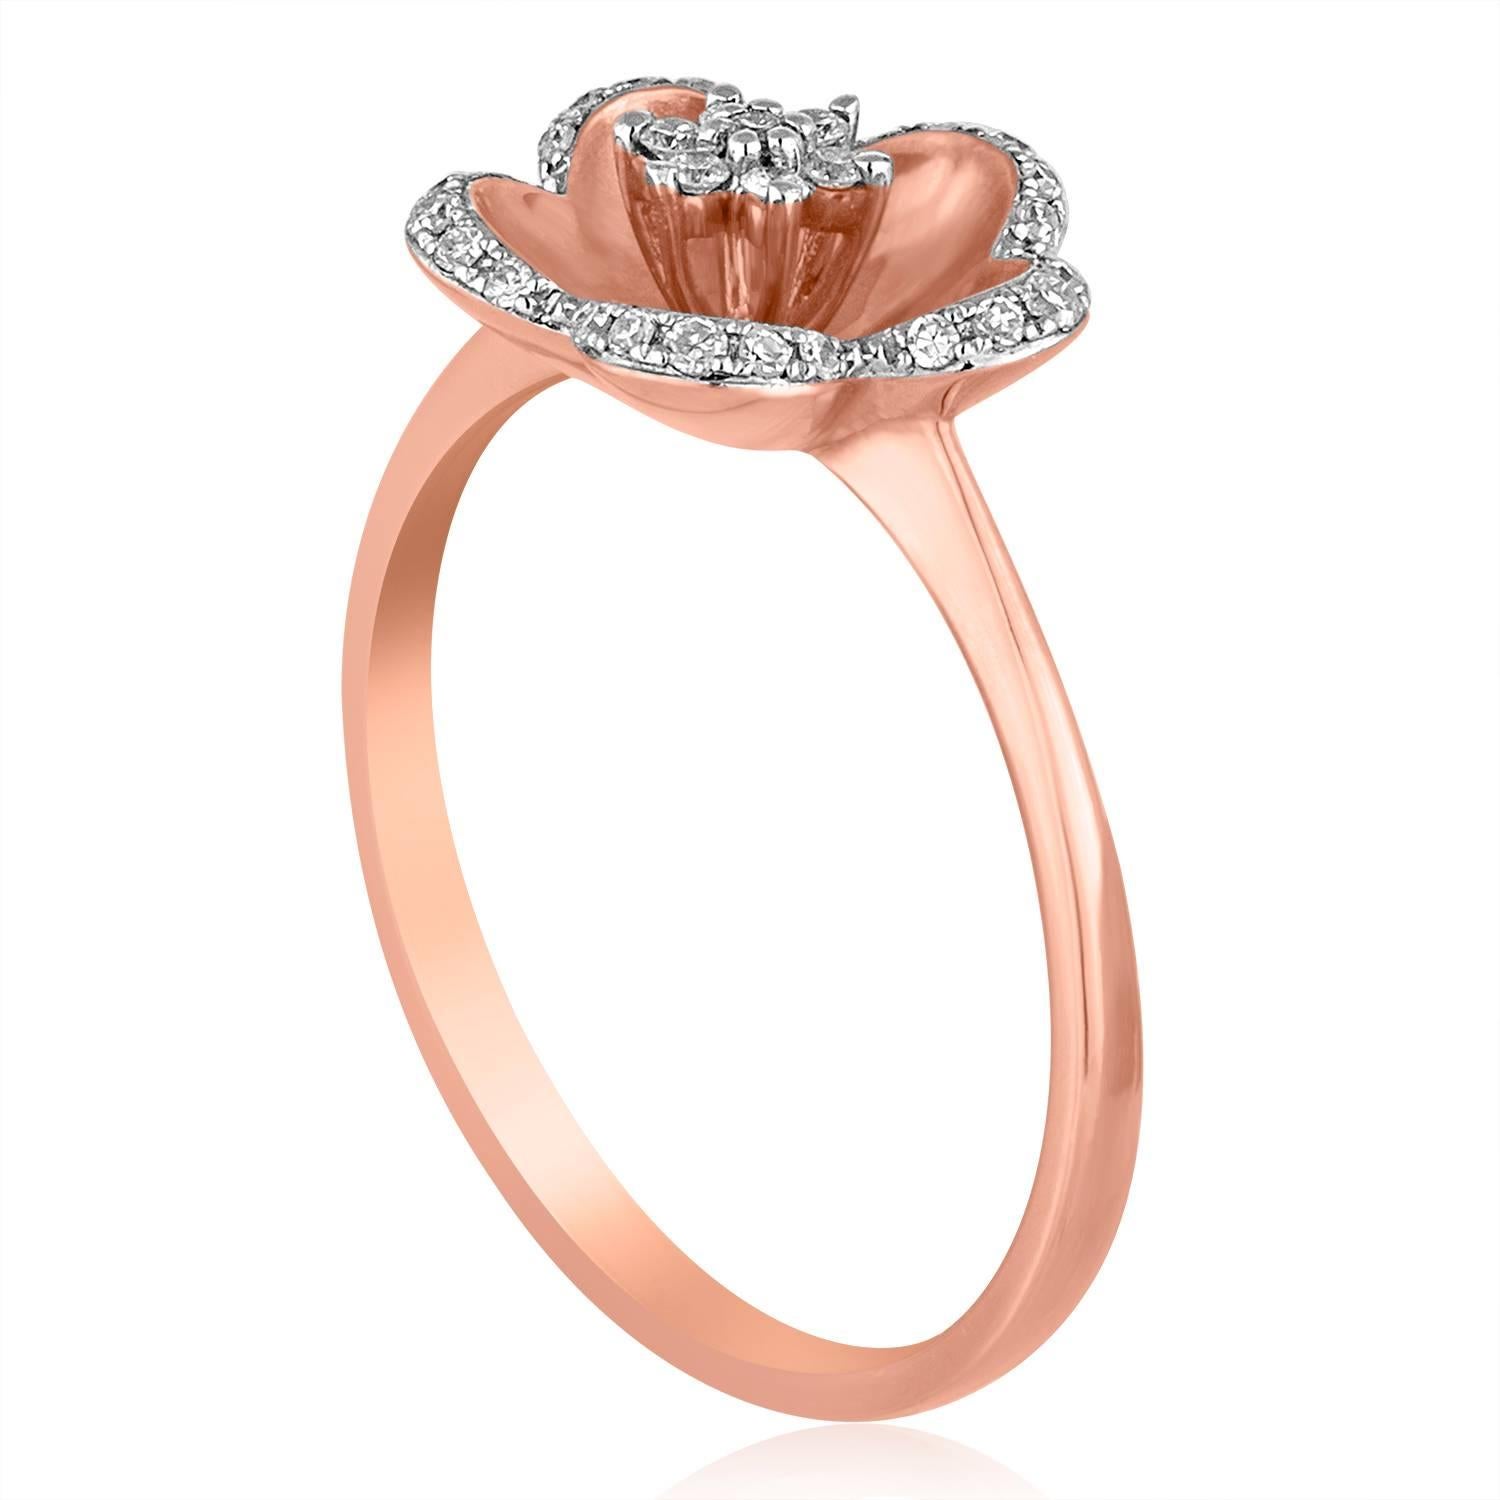 Delicate Flower Ring
The ring is 14K Rose Gold
There are 0.12 Carats In Diamonds  G/H SI
The top of the ring measures 7/16